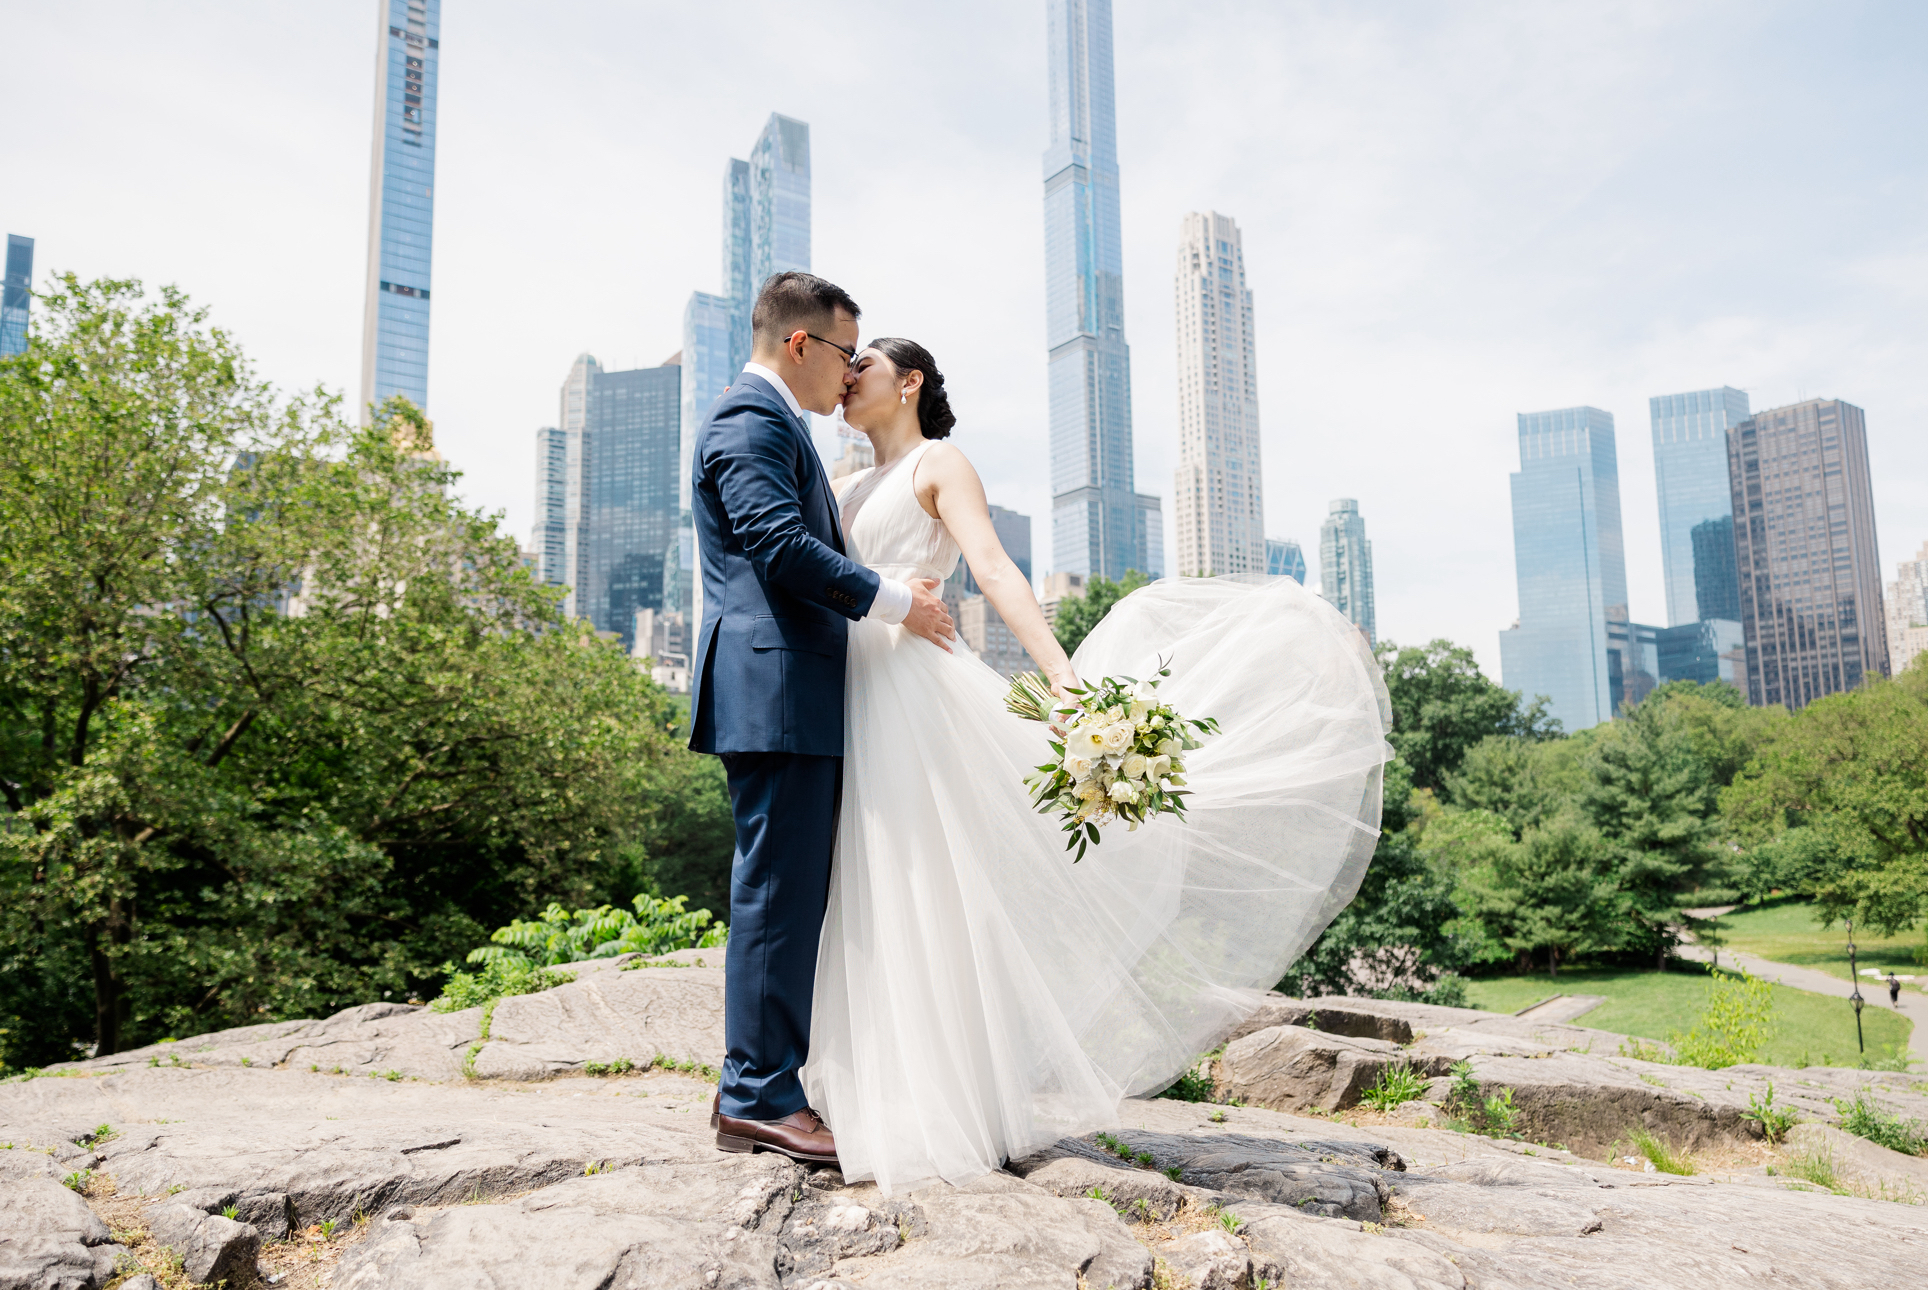 Idyllic Photos of New York Elopement in DUMBO and Central Park